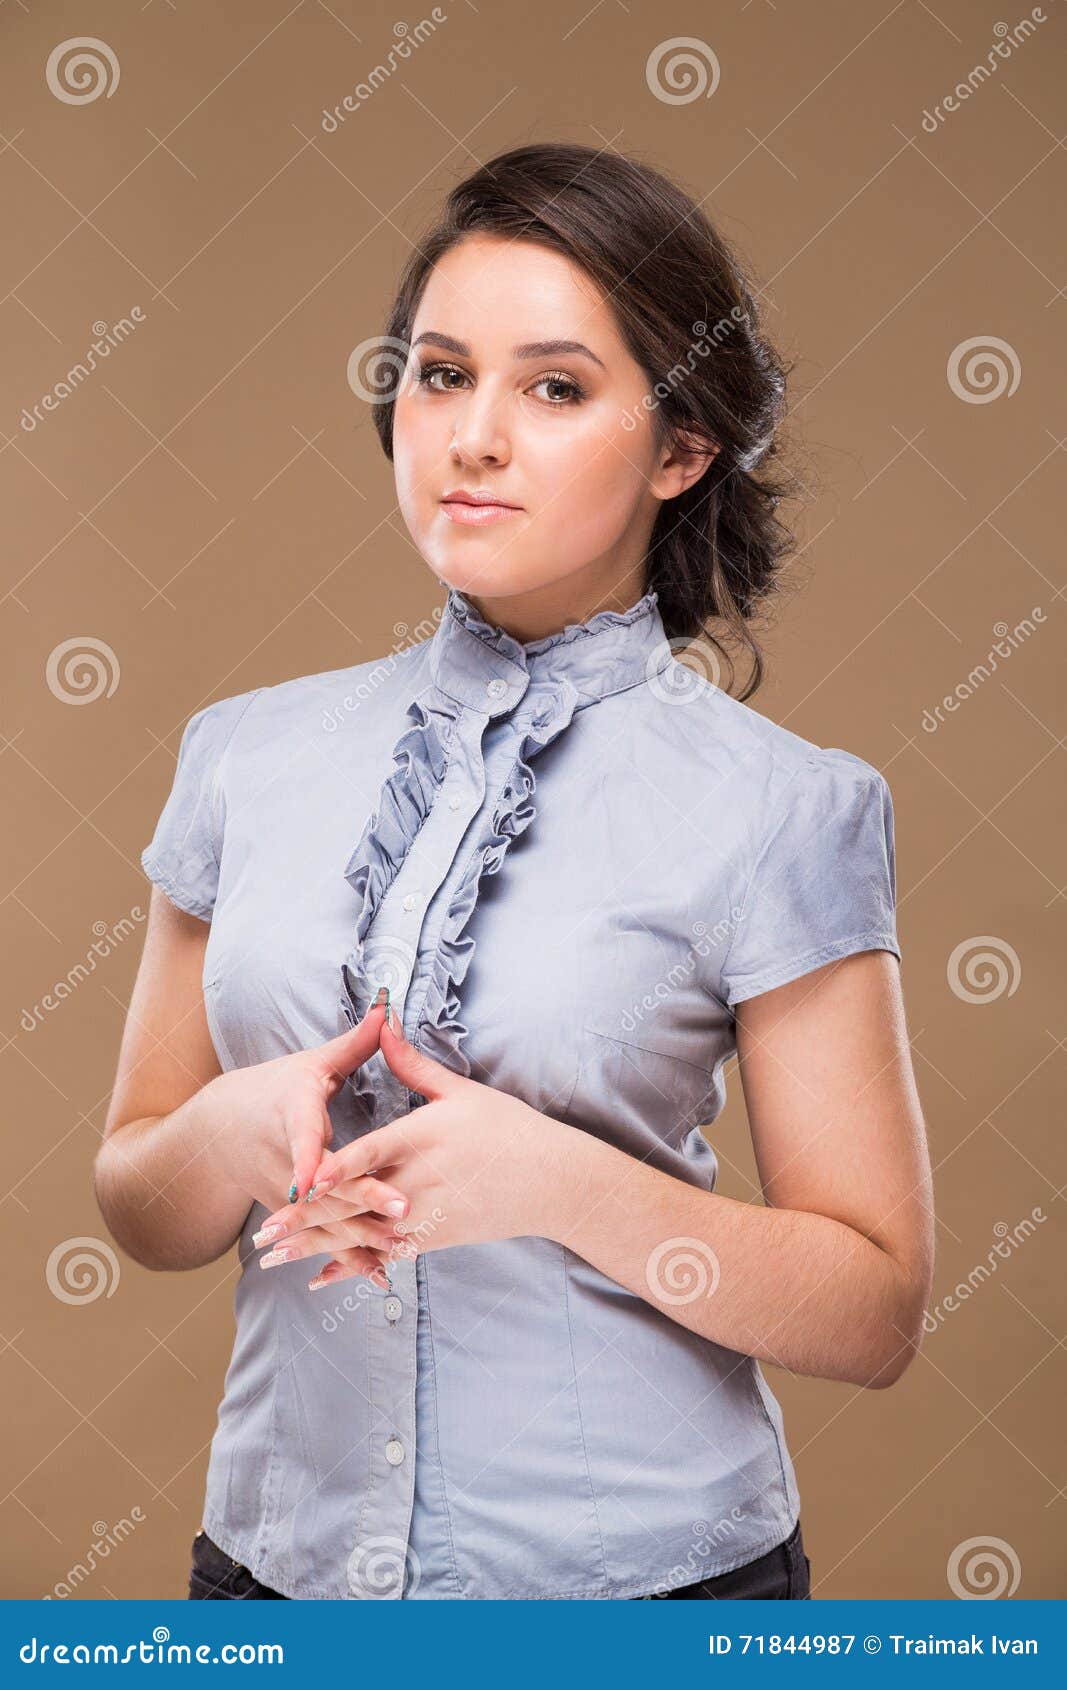 Girl In A Blue Shirt Stock Image Image Of Female Long 71844